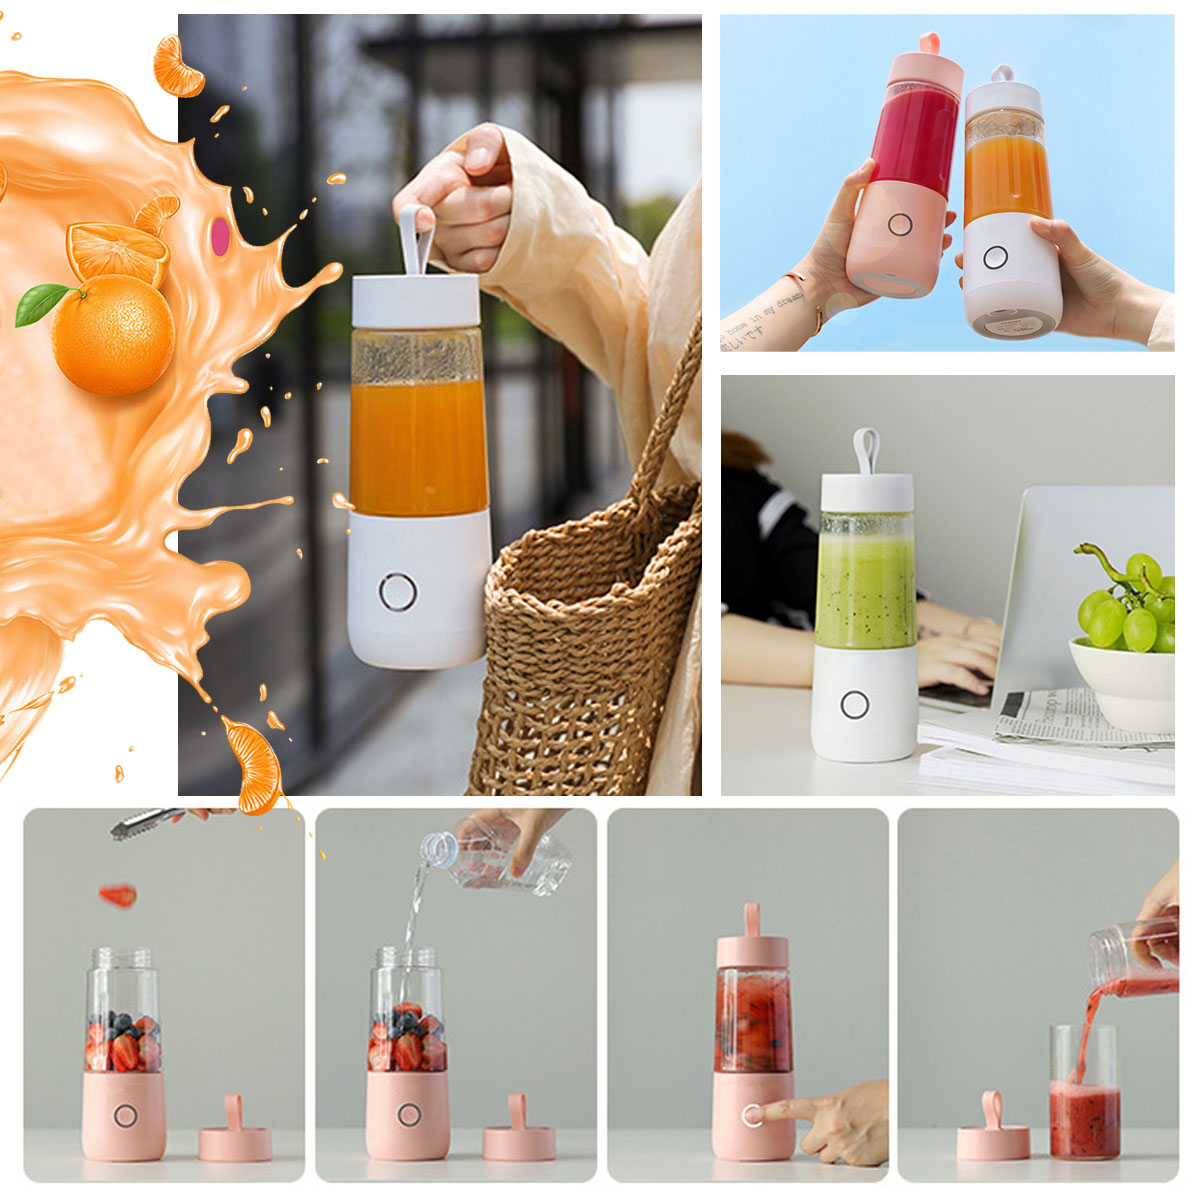 Warmtoo 380ml Portable Juicer Electric USB Rechargeable Smoothie Blender Machine Mixer Mini Juice Cup Maker Fast Blenders